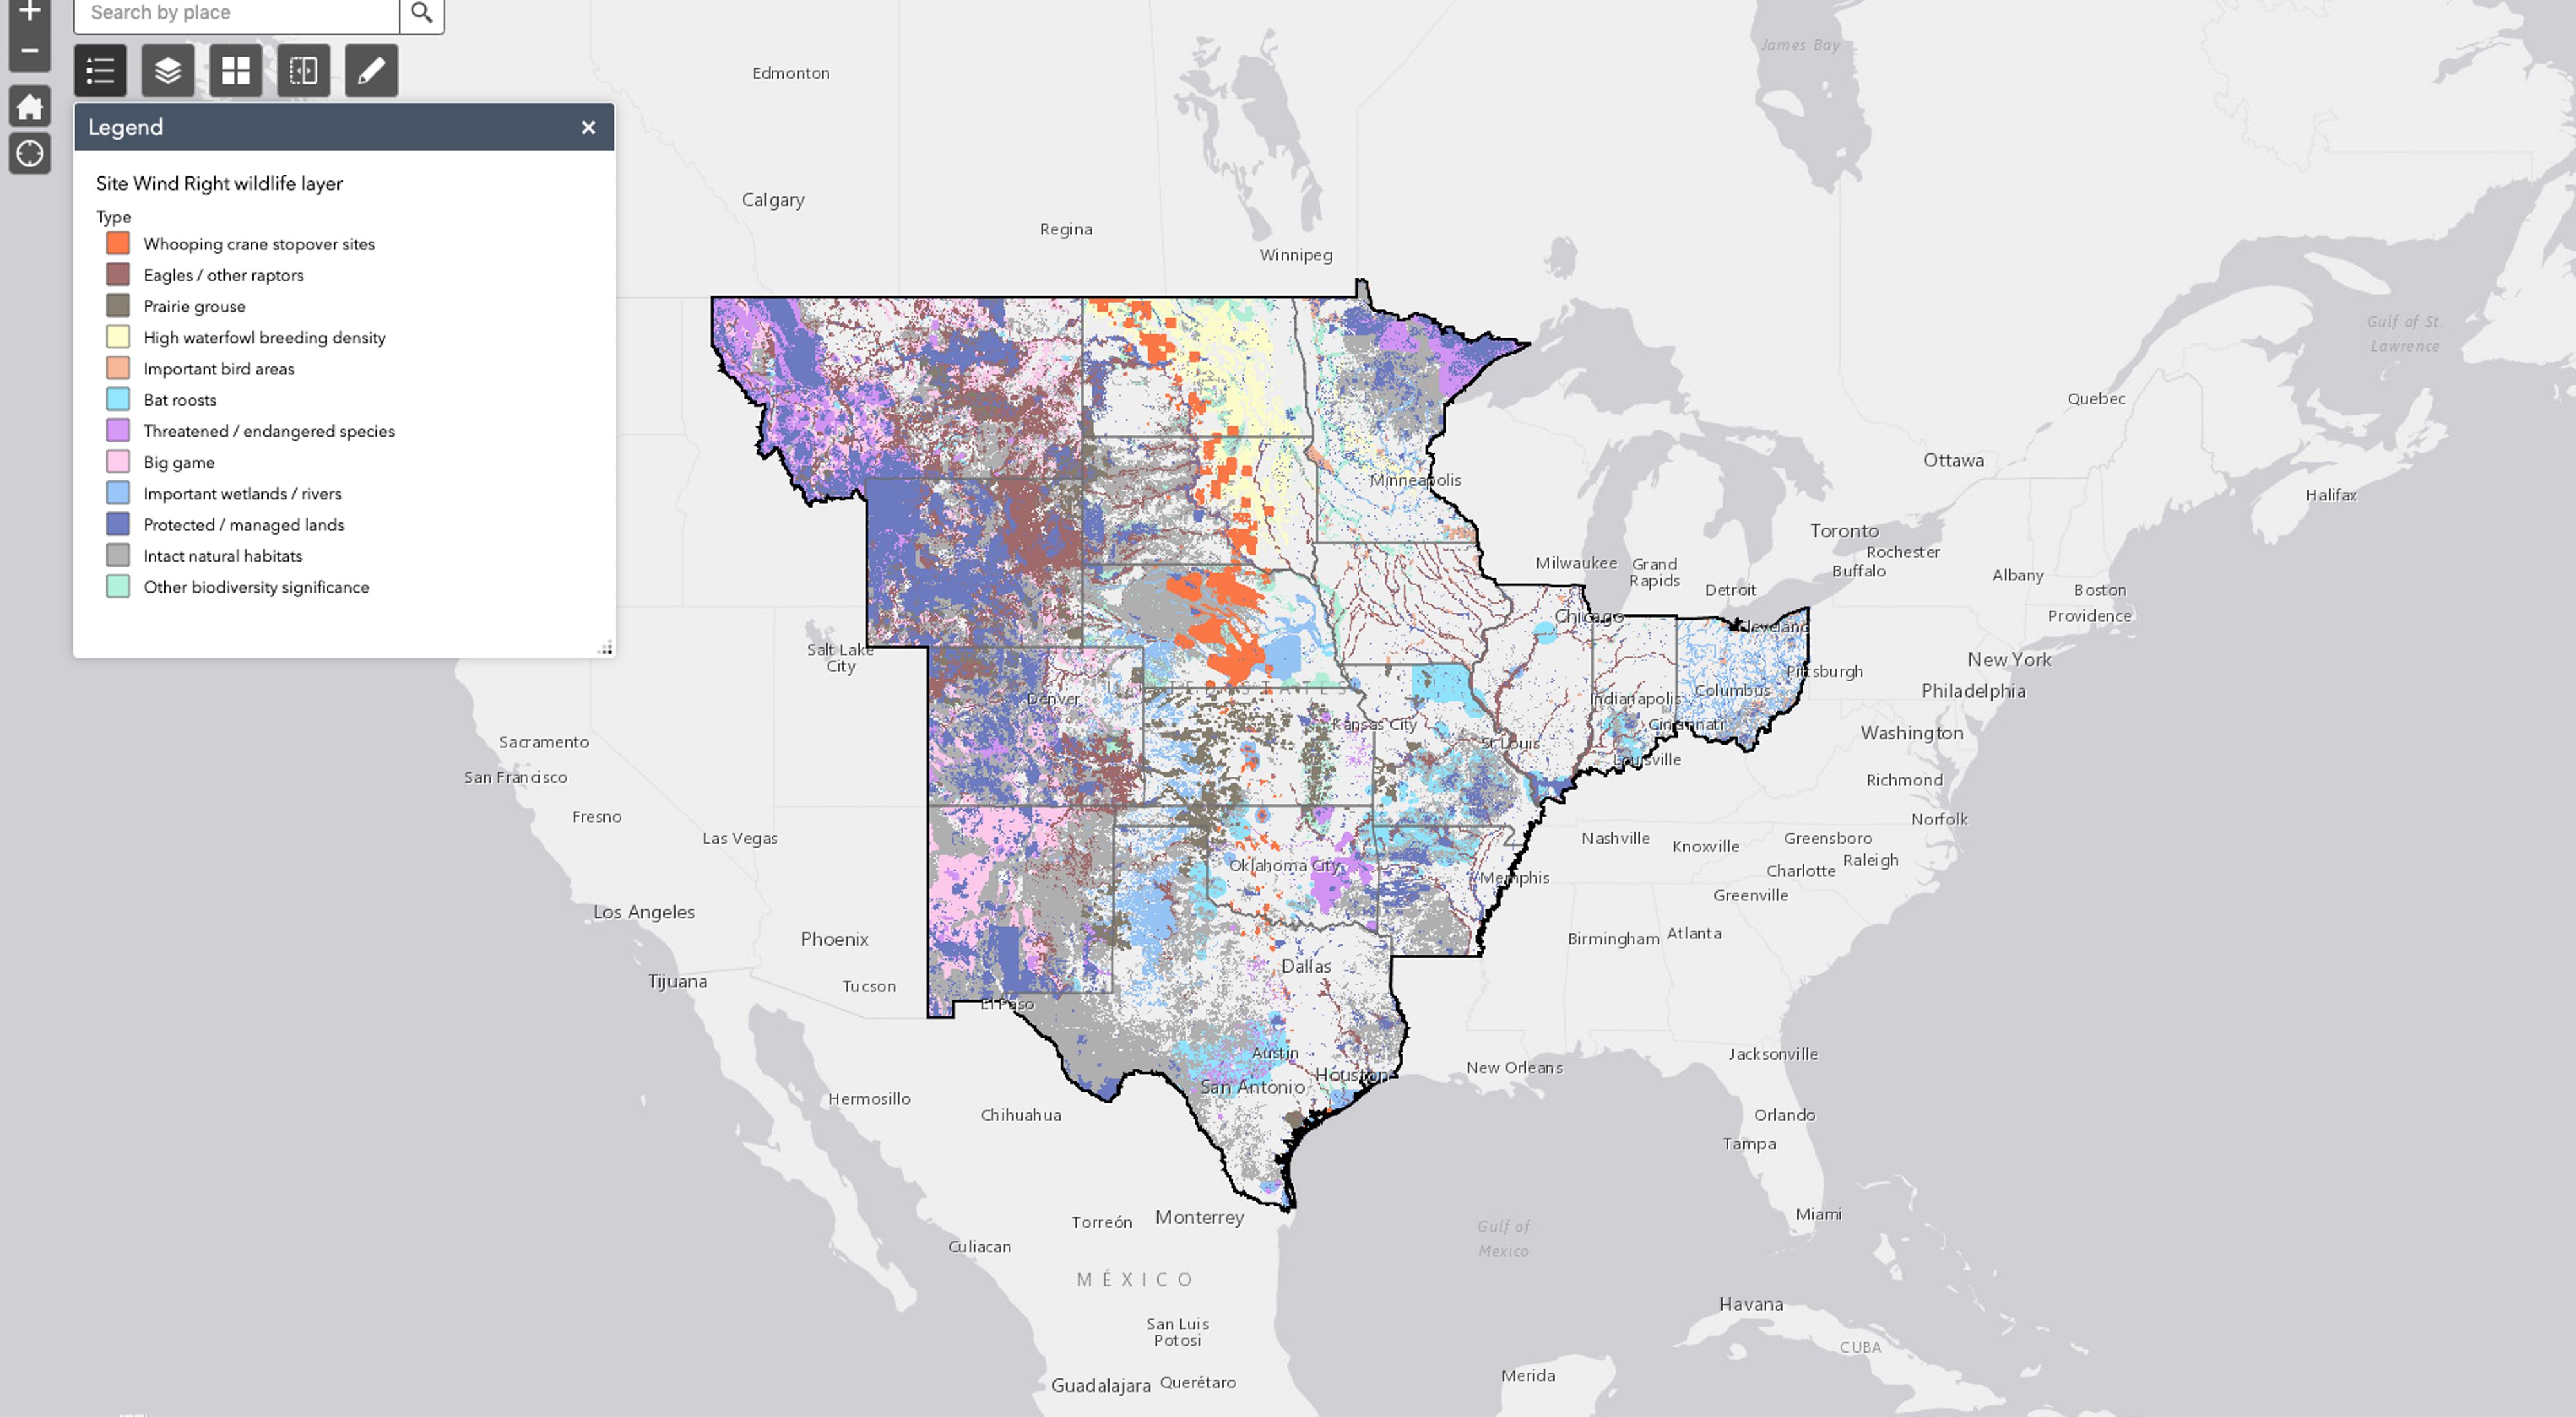 Map of the Site Wind Right tool's wildlife layers in the central U.S.